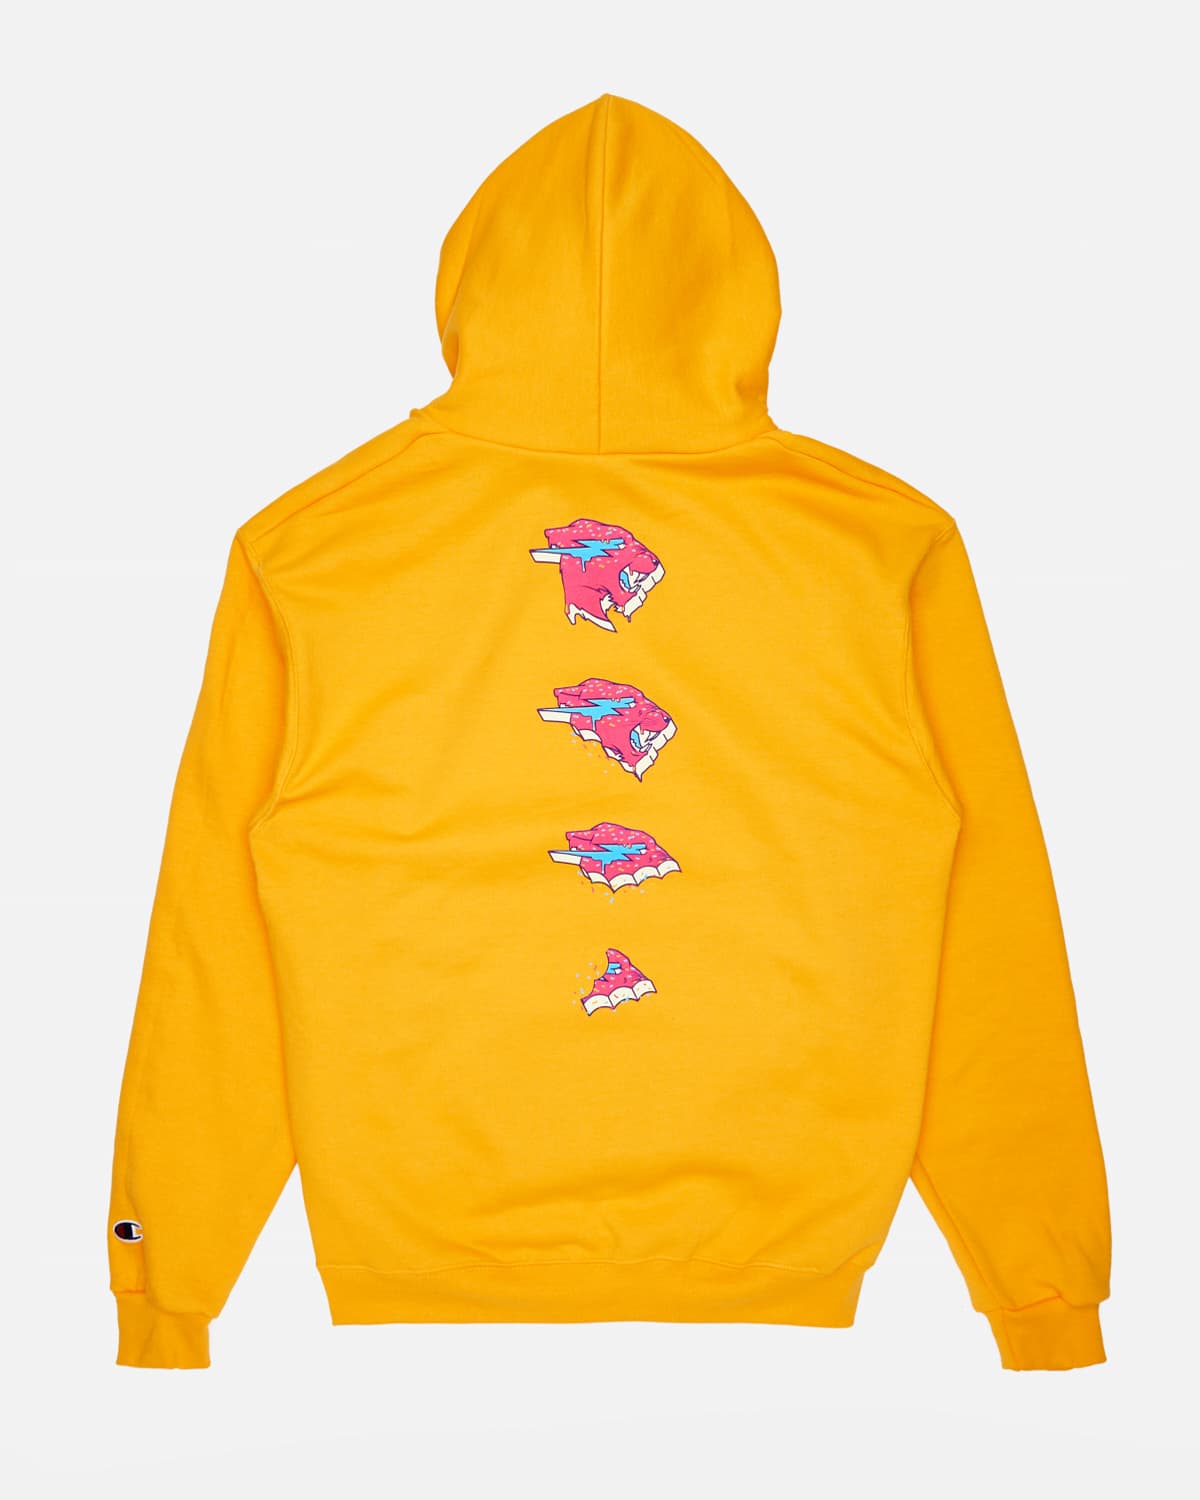 champion youth hoodie canada